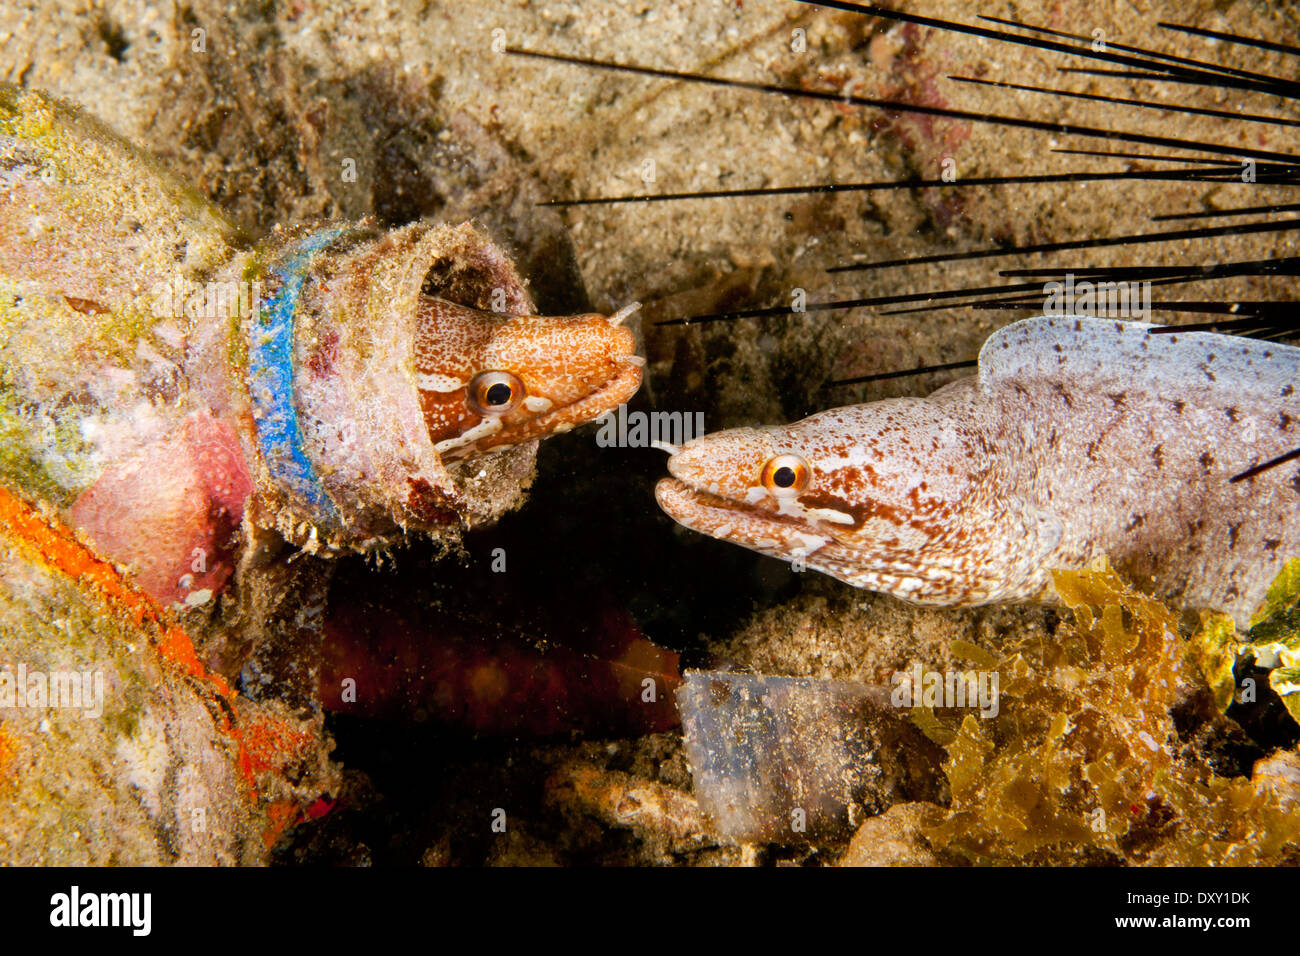 Barred-fin Moray inside a Bottle, Gymnothorax zonipectis, Raja Ampat, West Papua, Indonesia Stock Photo